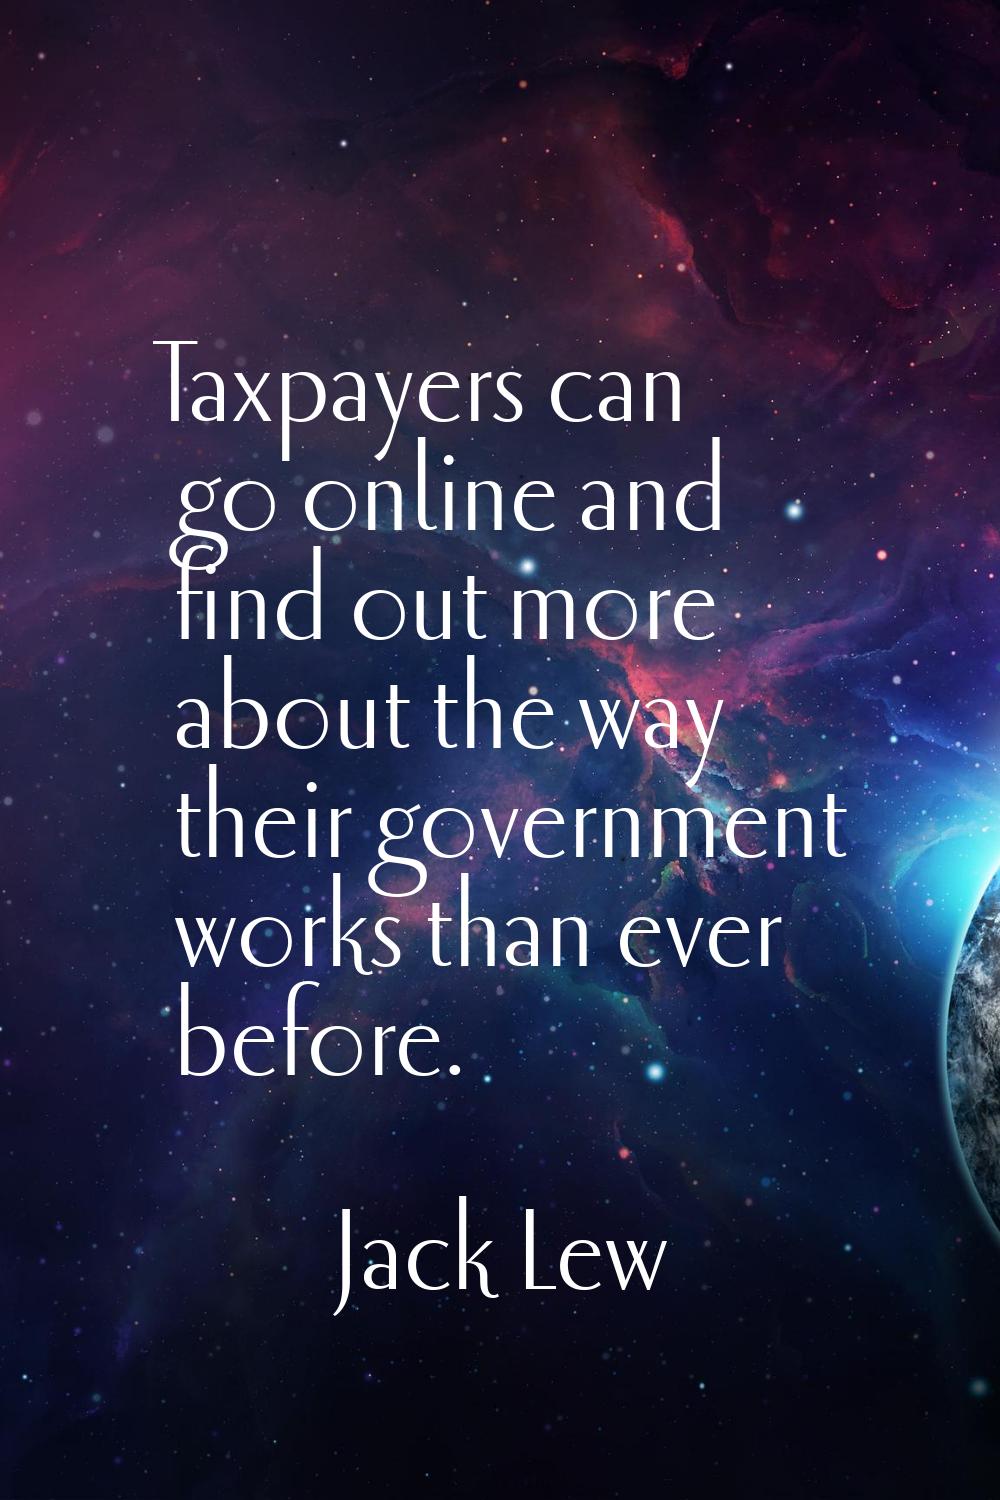 Taxpayers can go online and find out more about the way their government works than ever before.